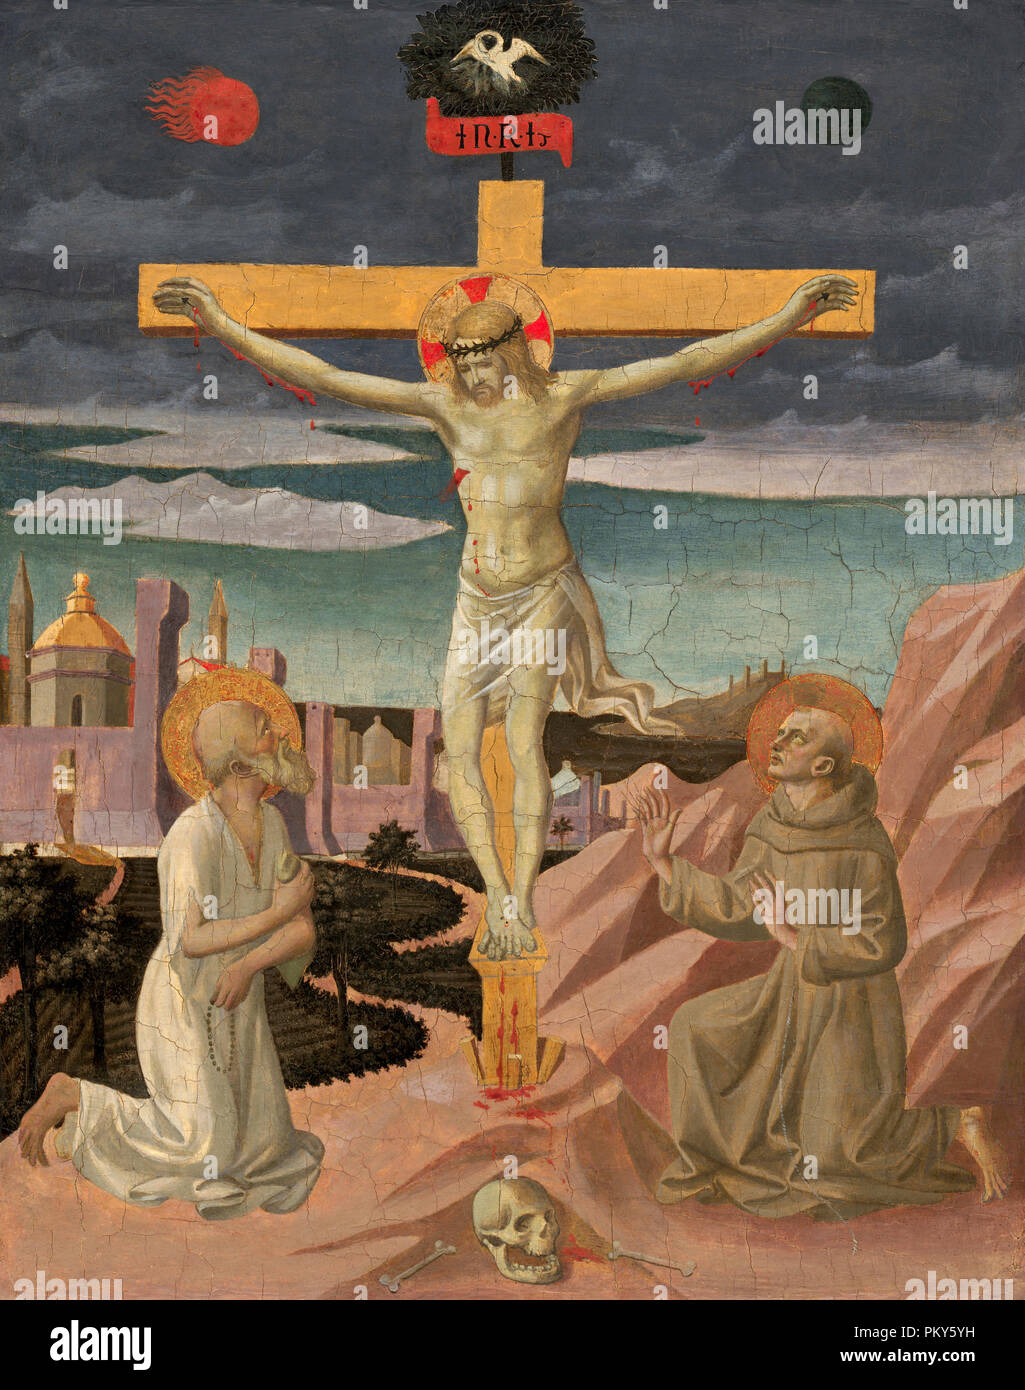 The Crucifixion with Saint Jerome and Saint Francis. Dated: c. 1445/1450. Dimensions: overall: 61.5 x 49.1 cm (24 3/16 x 19 5/16 in.)  framed: 96.5 x 75.6 x 10.2 cm (38 x 29 3/4 x 4 in.). Medium: tempera on poplar panel. Museum: National Gallery of Art, Washington DC. Author: Pesellino. Stock Photo